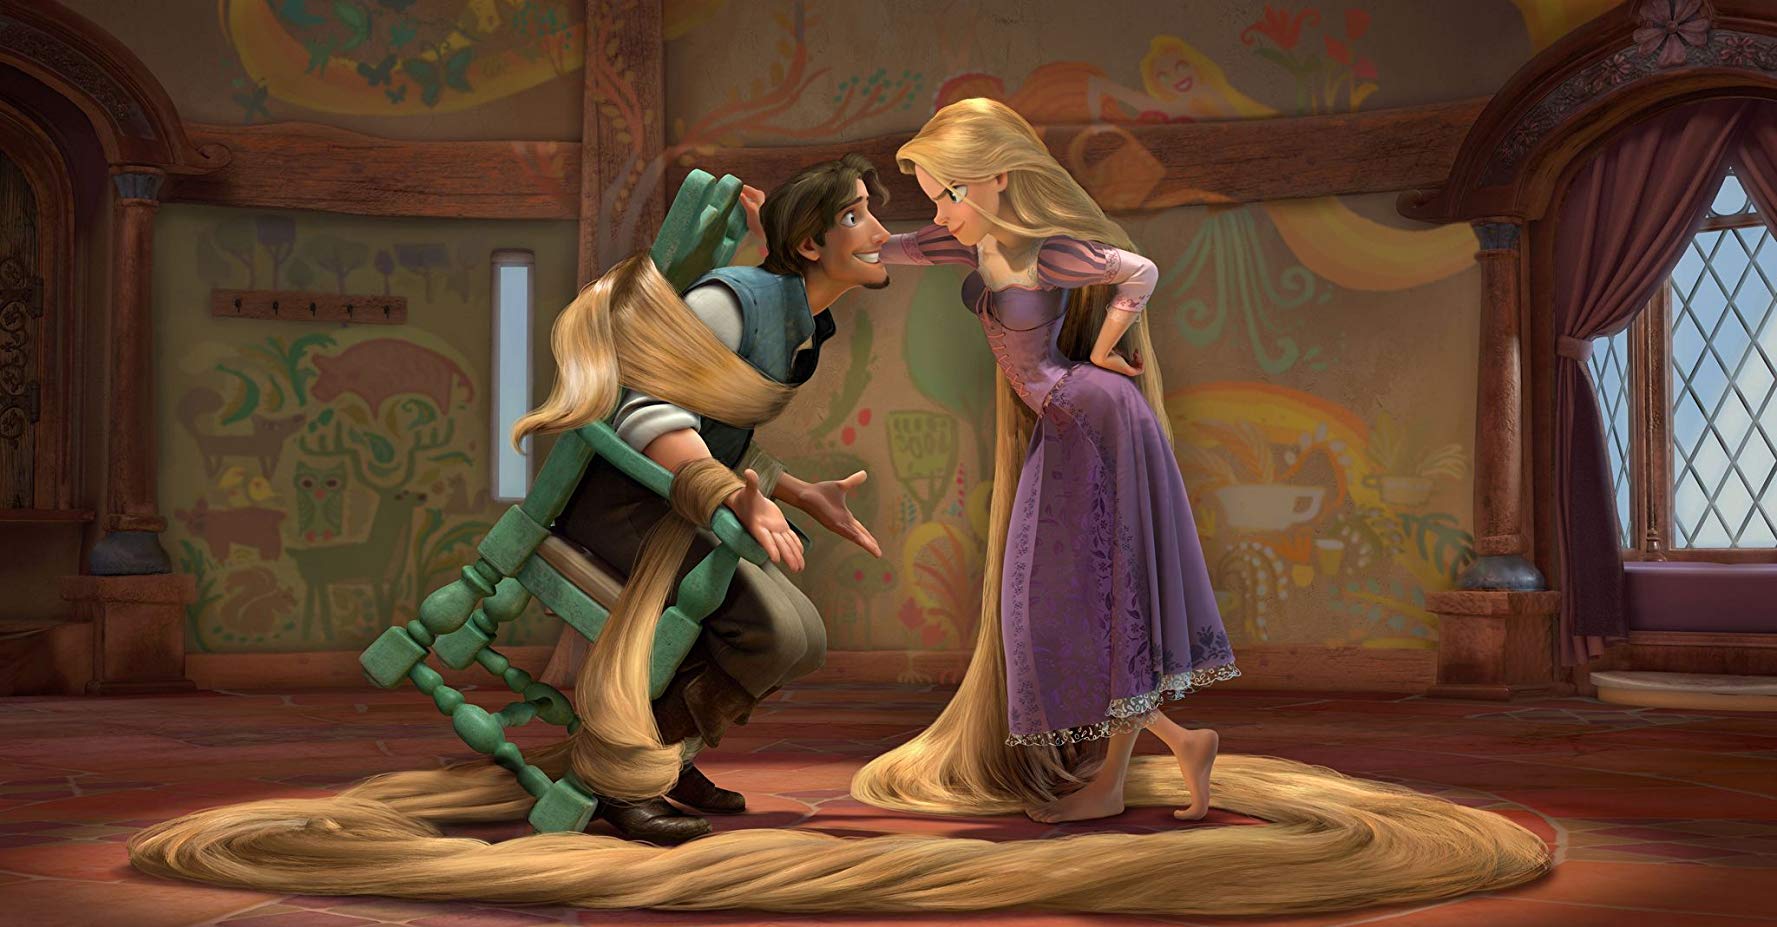 Rapunzel (voiced by Mandy Moore) along with an imprisoned Flynn Rider (voiced by Zachary Levi) in Tangled (2010)